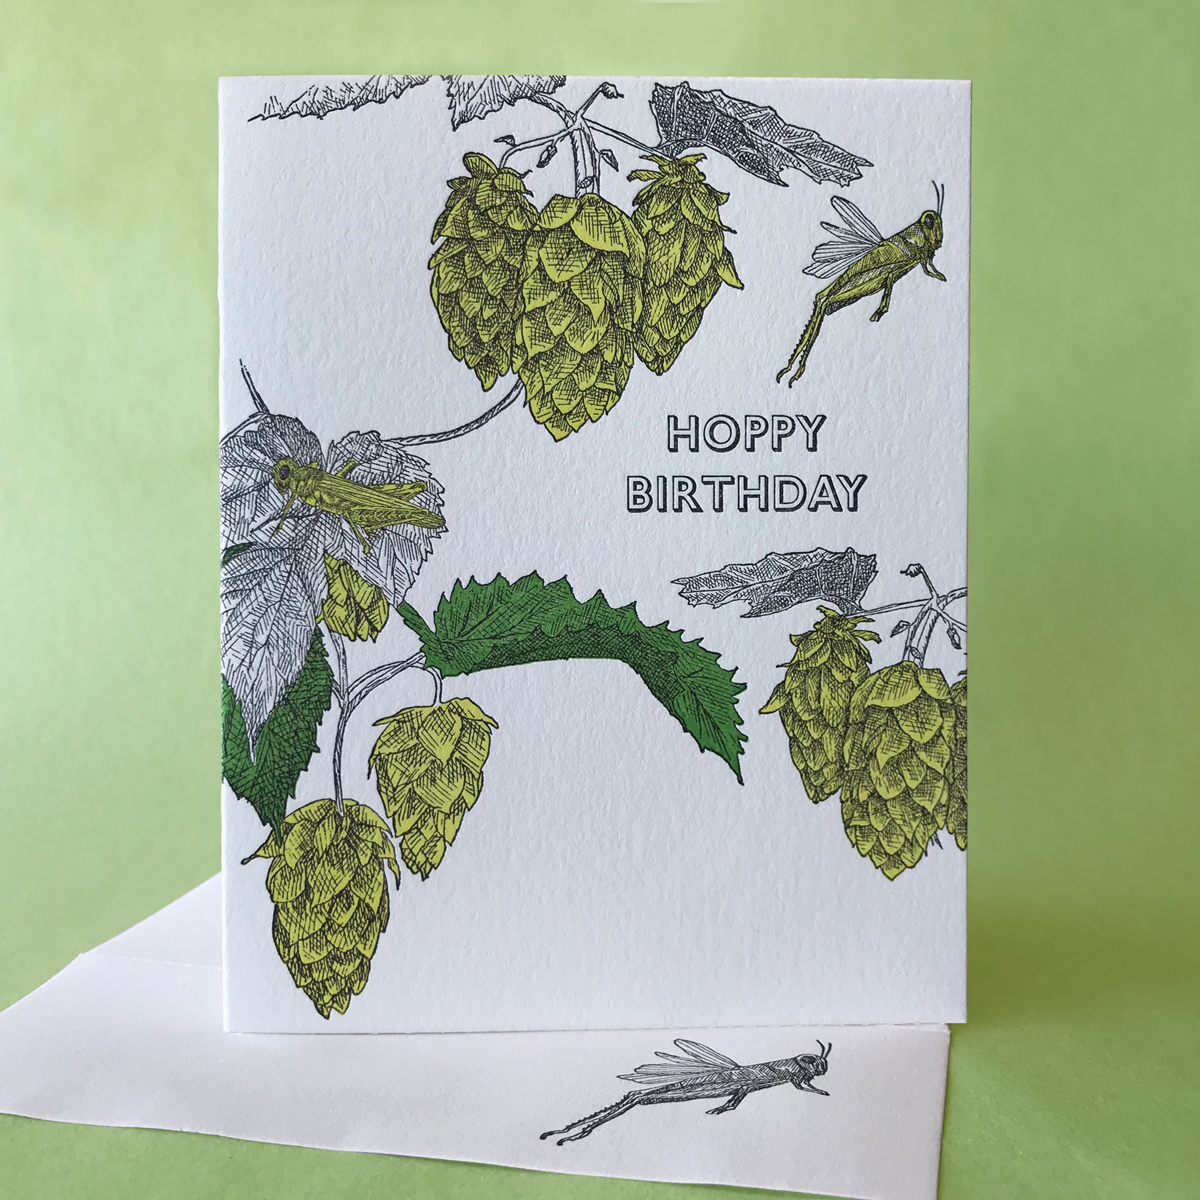 Hops with Grasshoppers Birthday Card